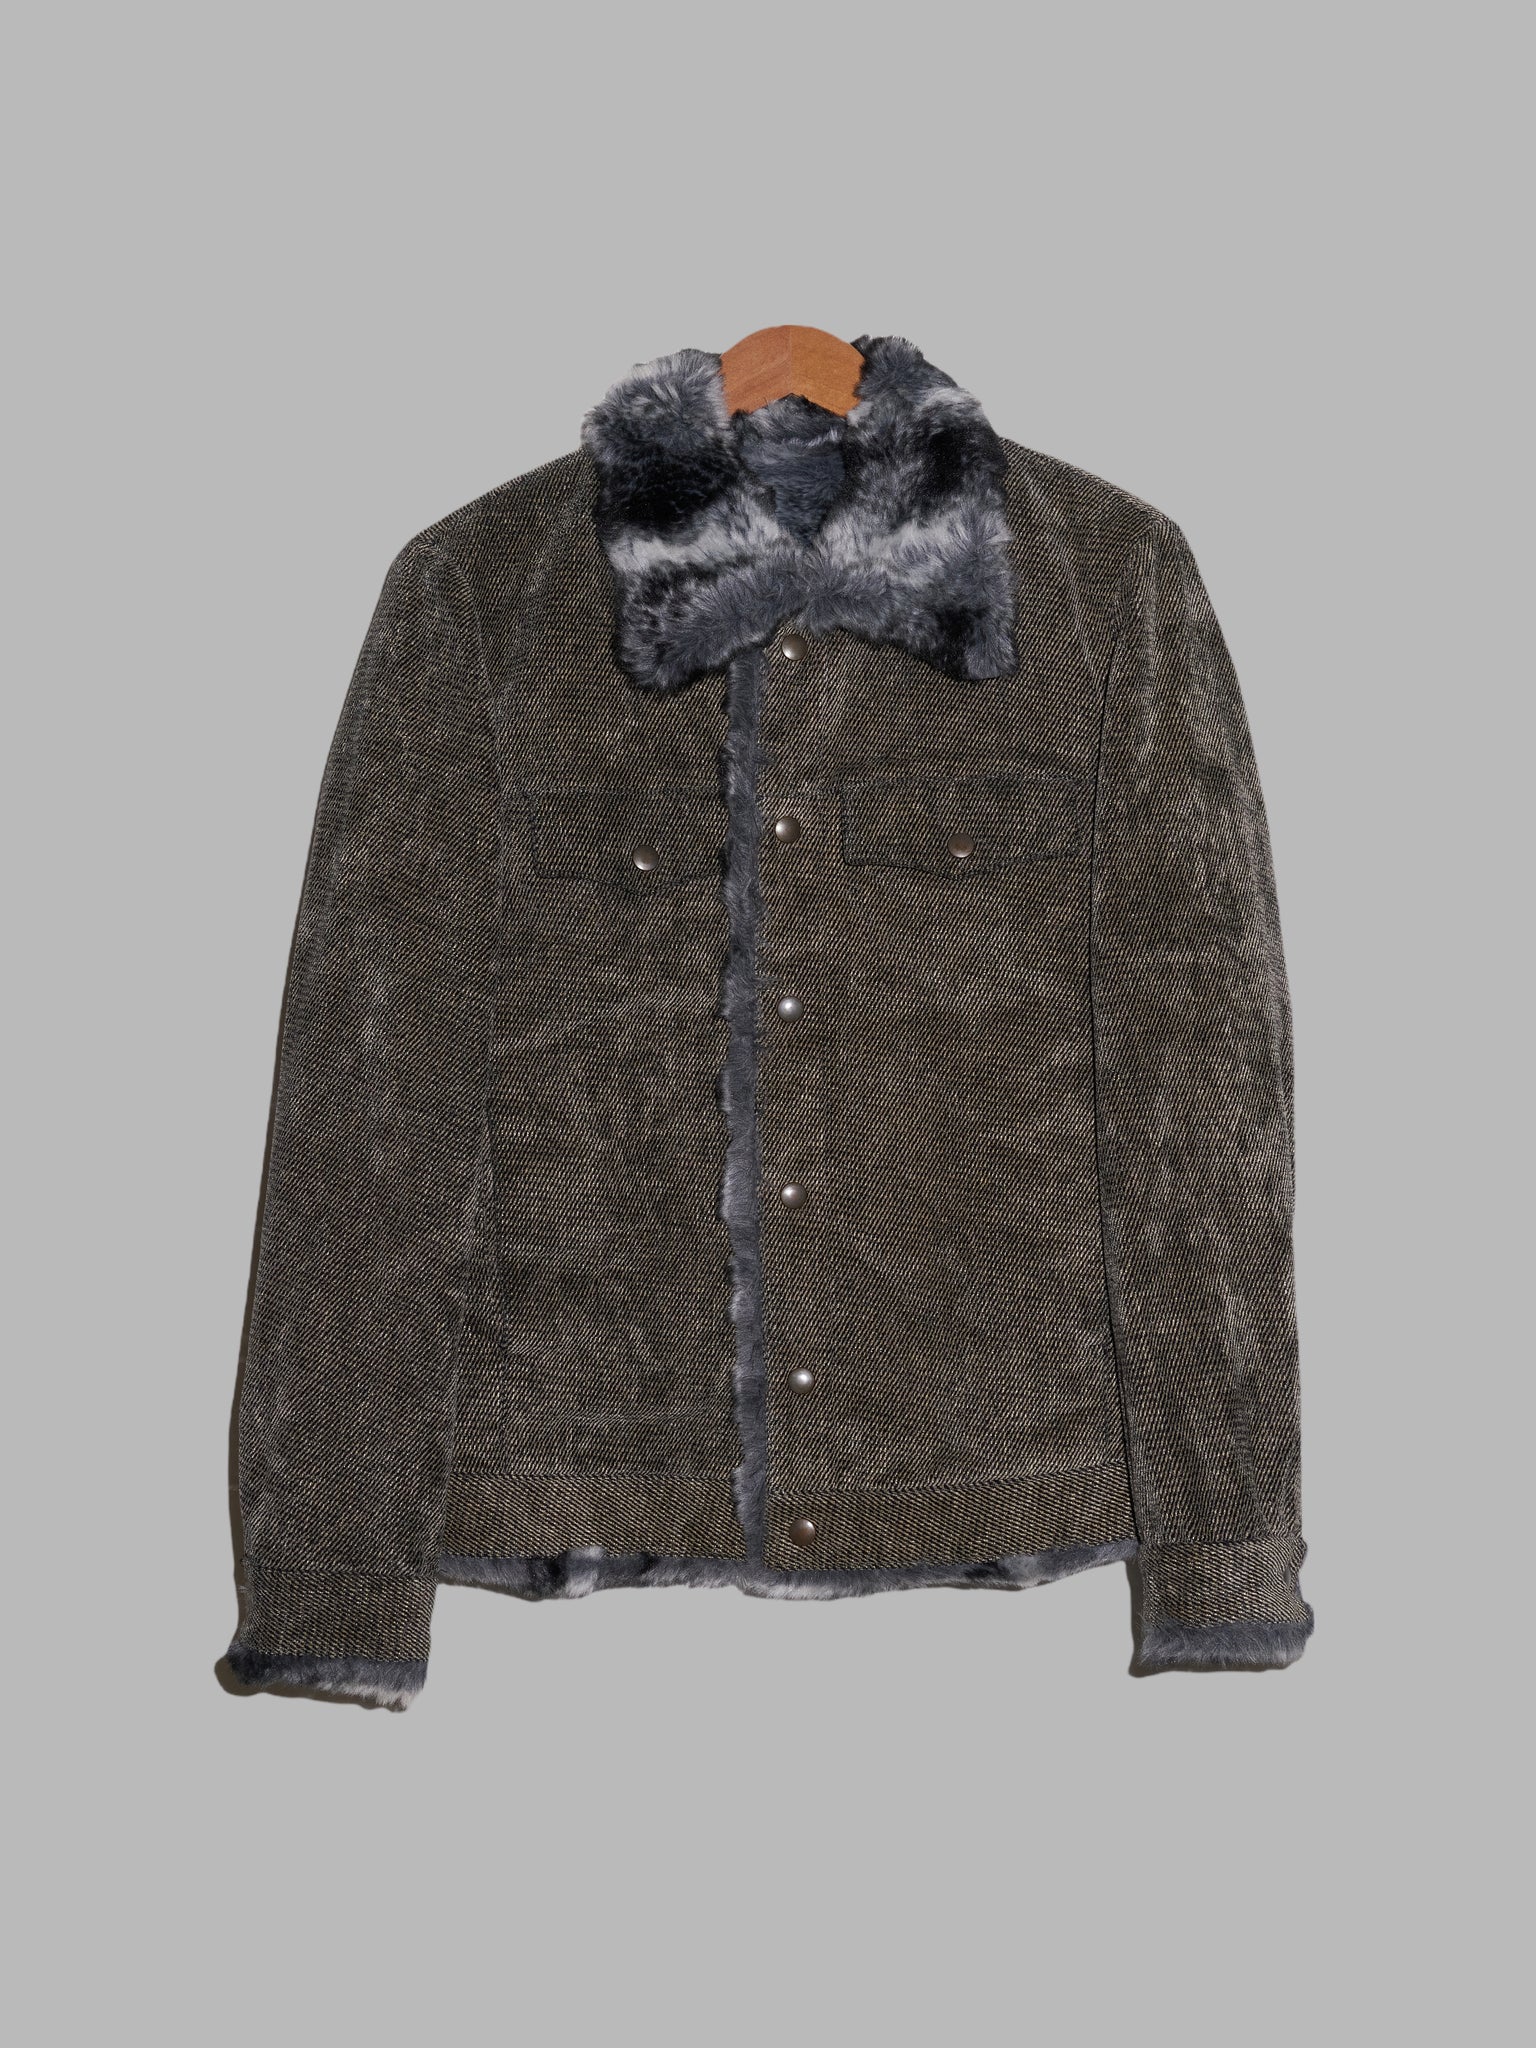 Keita Maruyama Homme brown brushed cotton faux fur lined trucker jacket - S XS M